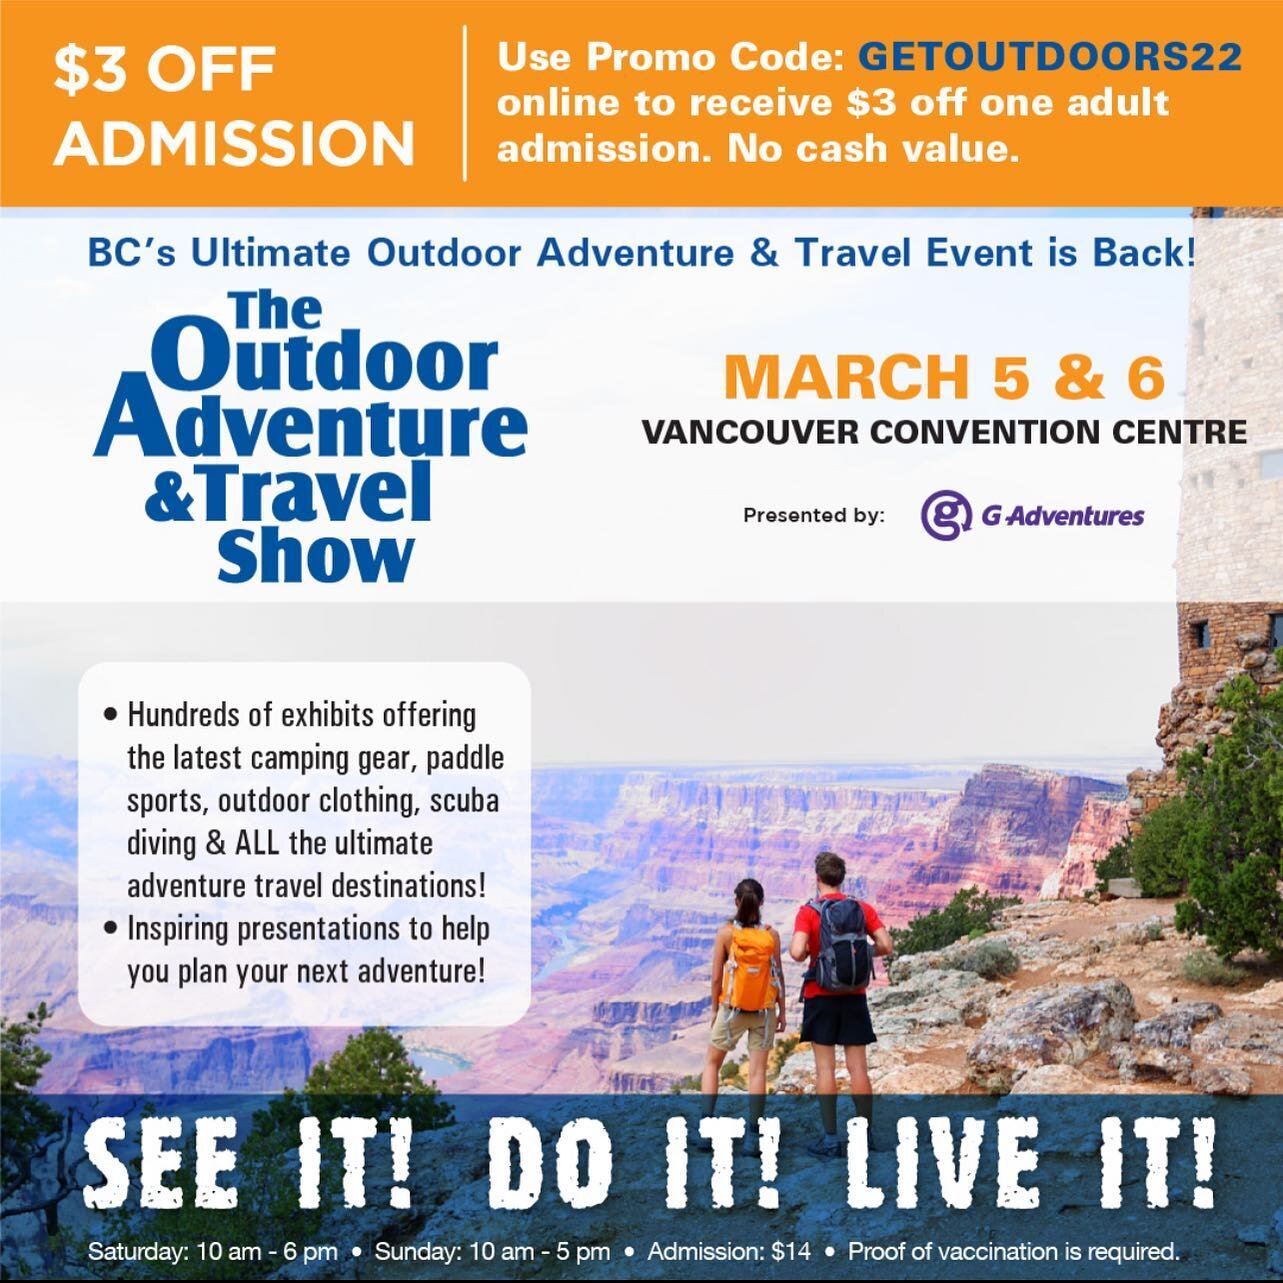 🏔👋 Hey all you outdoor enthusiasts!
.
If you&rsquo;re looking to head on into the city this weekend to visit us at the Outdoor Adventure &amp; Travel Show, here&rsquo;s a coupon for $3 off your admission! 🎟  All you have to do is head on over to t